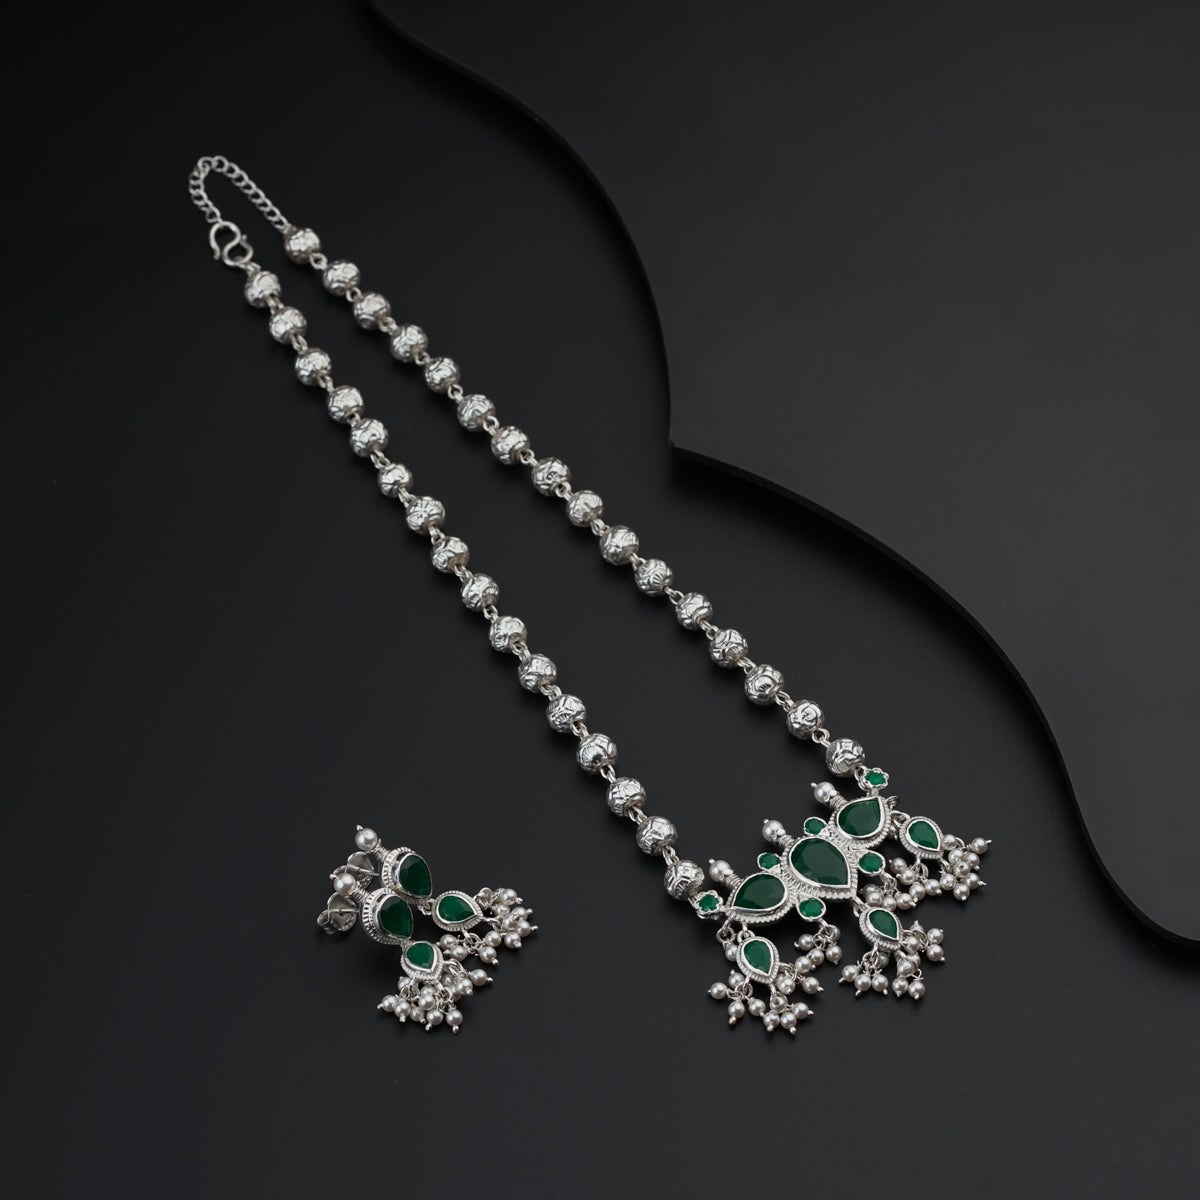 a necklace and earring set with green stones